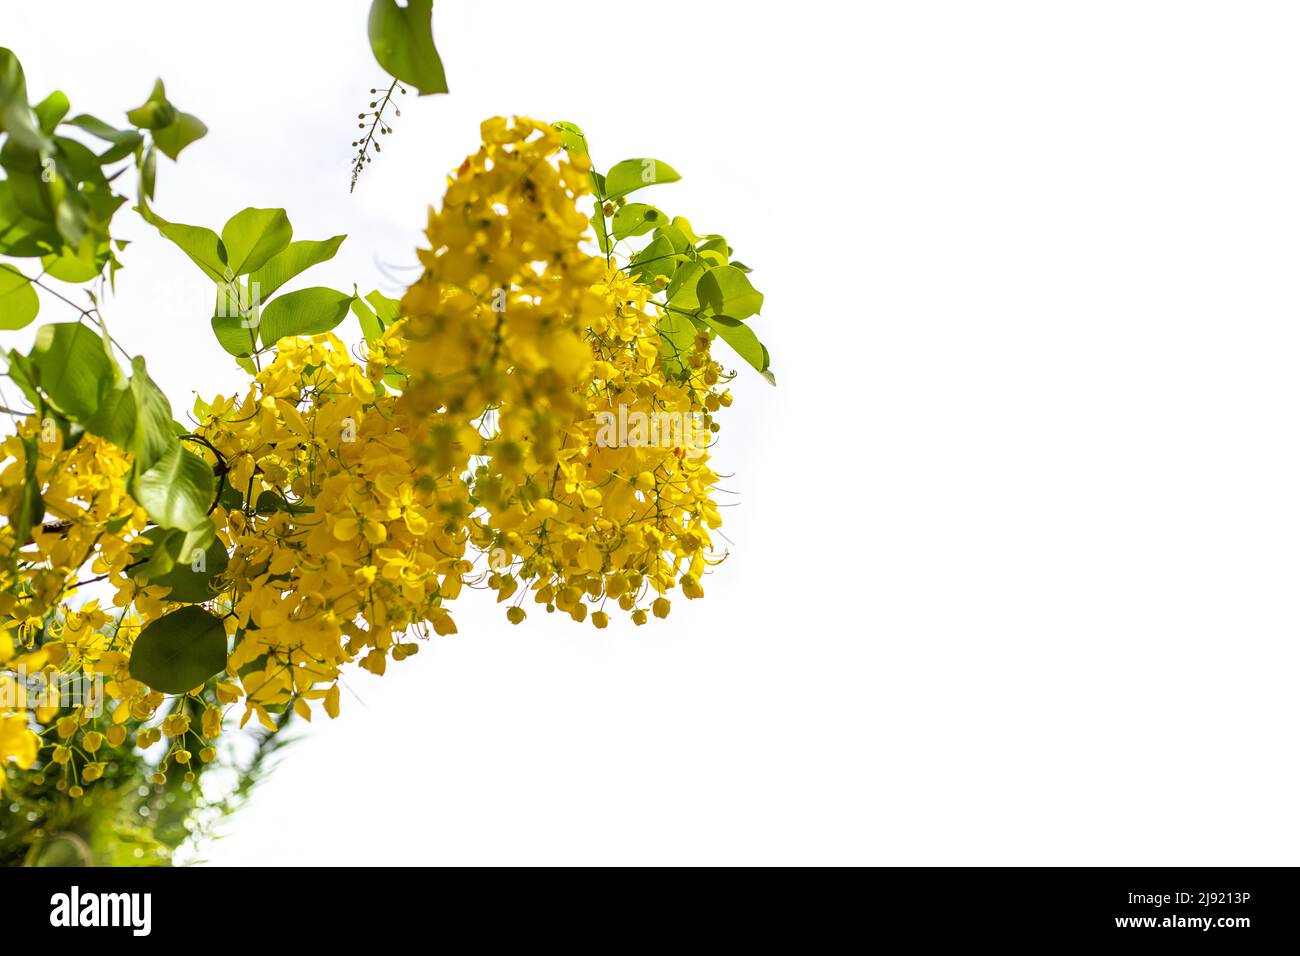 Inflorescence of bright yellow cassia fistula flowers on a white background, space for text. Tropical plants of Asia. Stock Photo